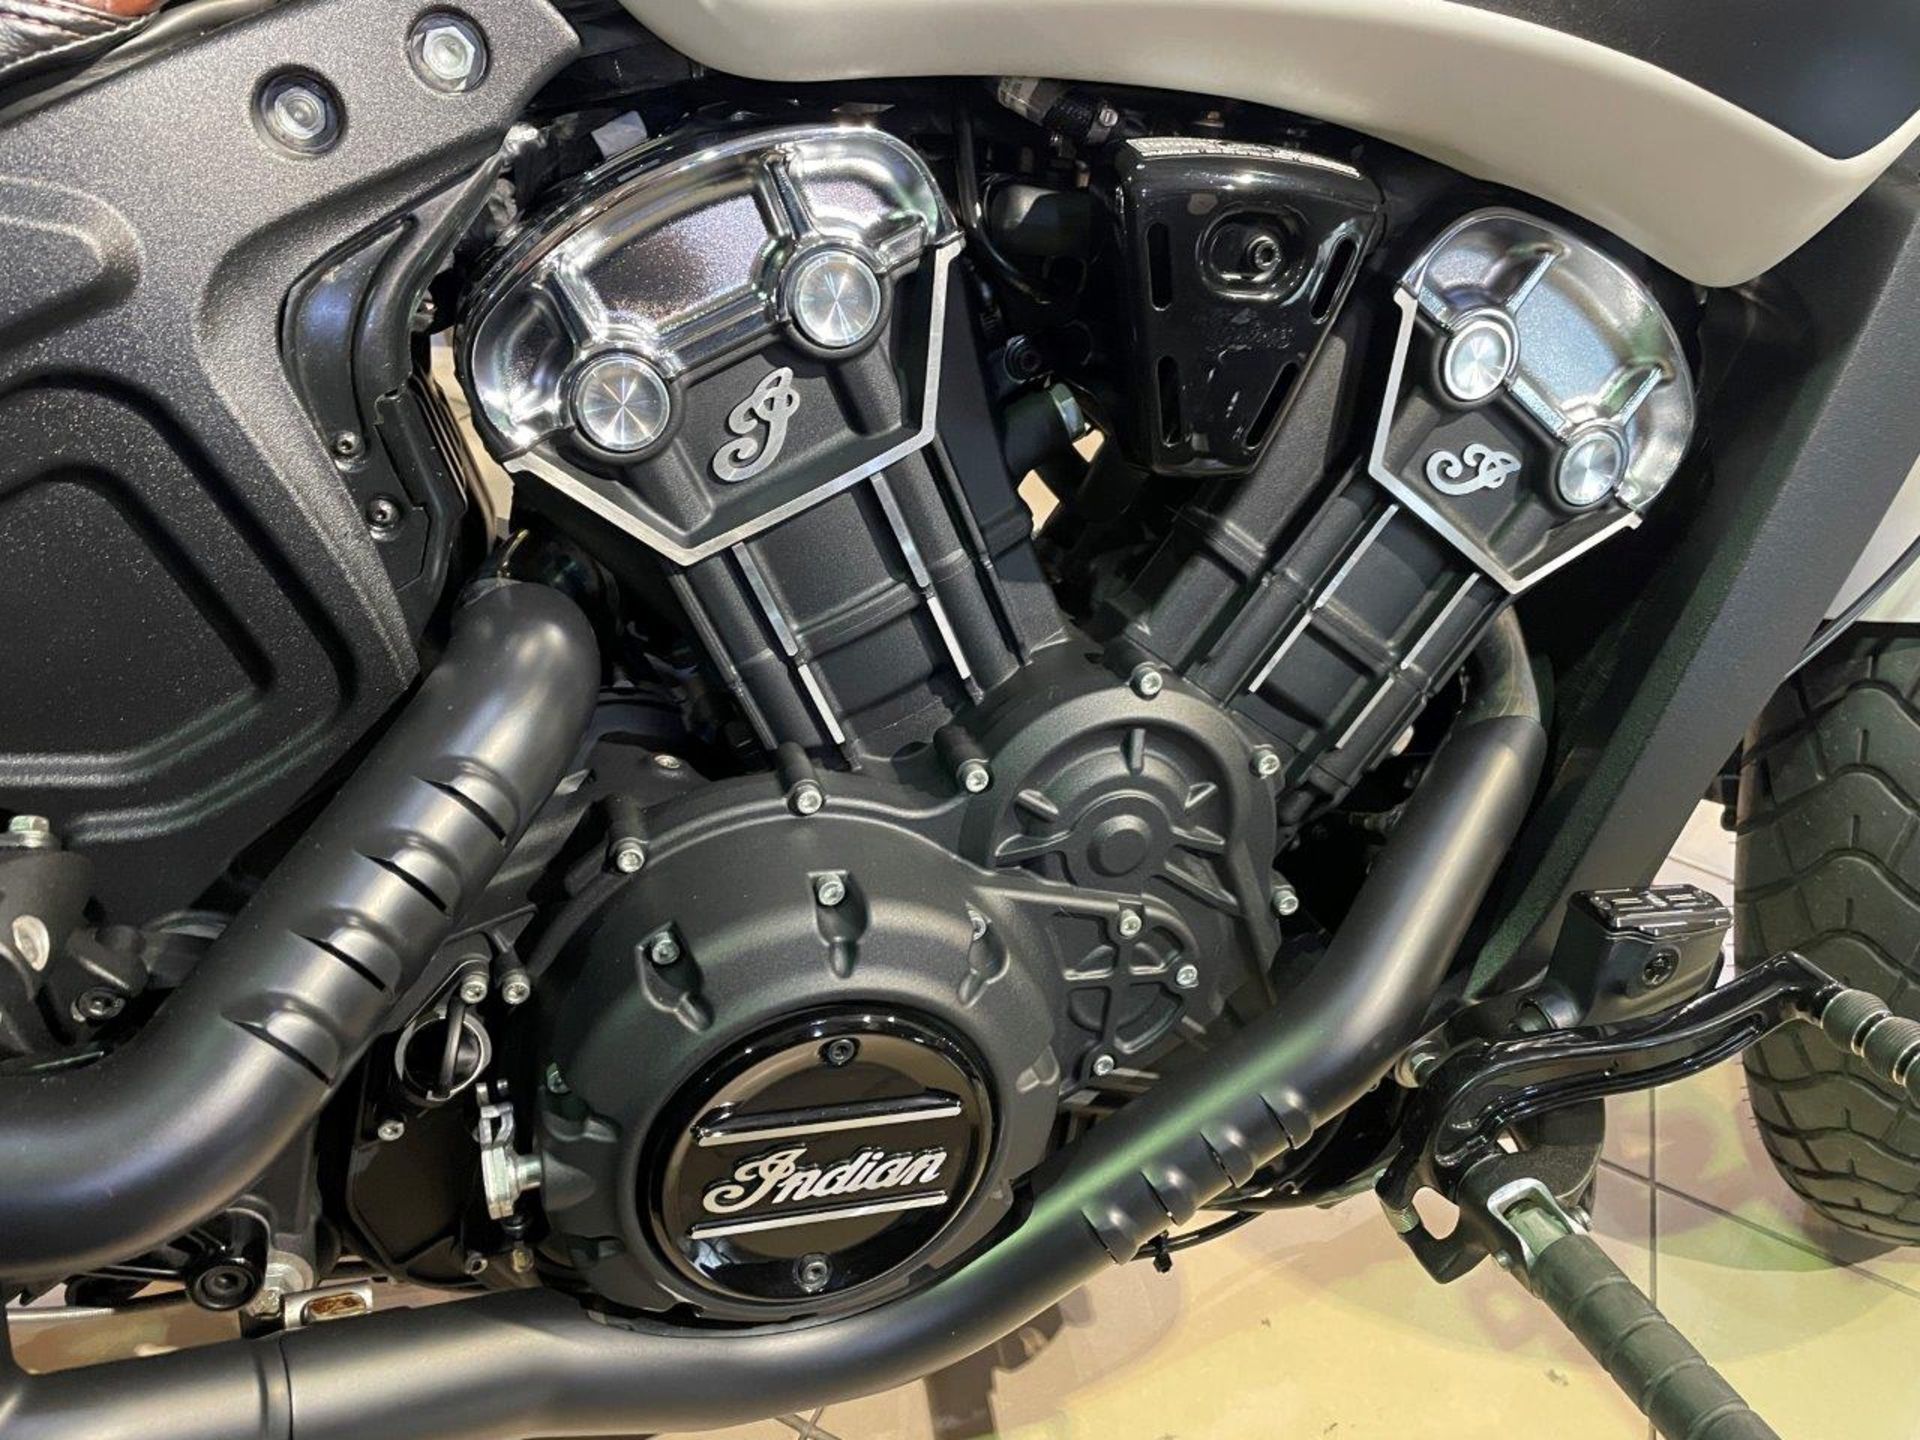 Indian Motorcycles Scout Bobber Motorbike (May 2019) - Image 9 of 18